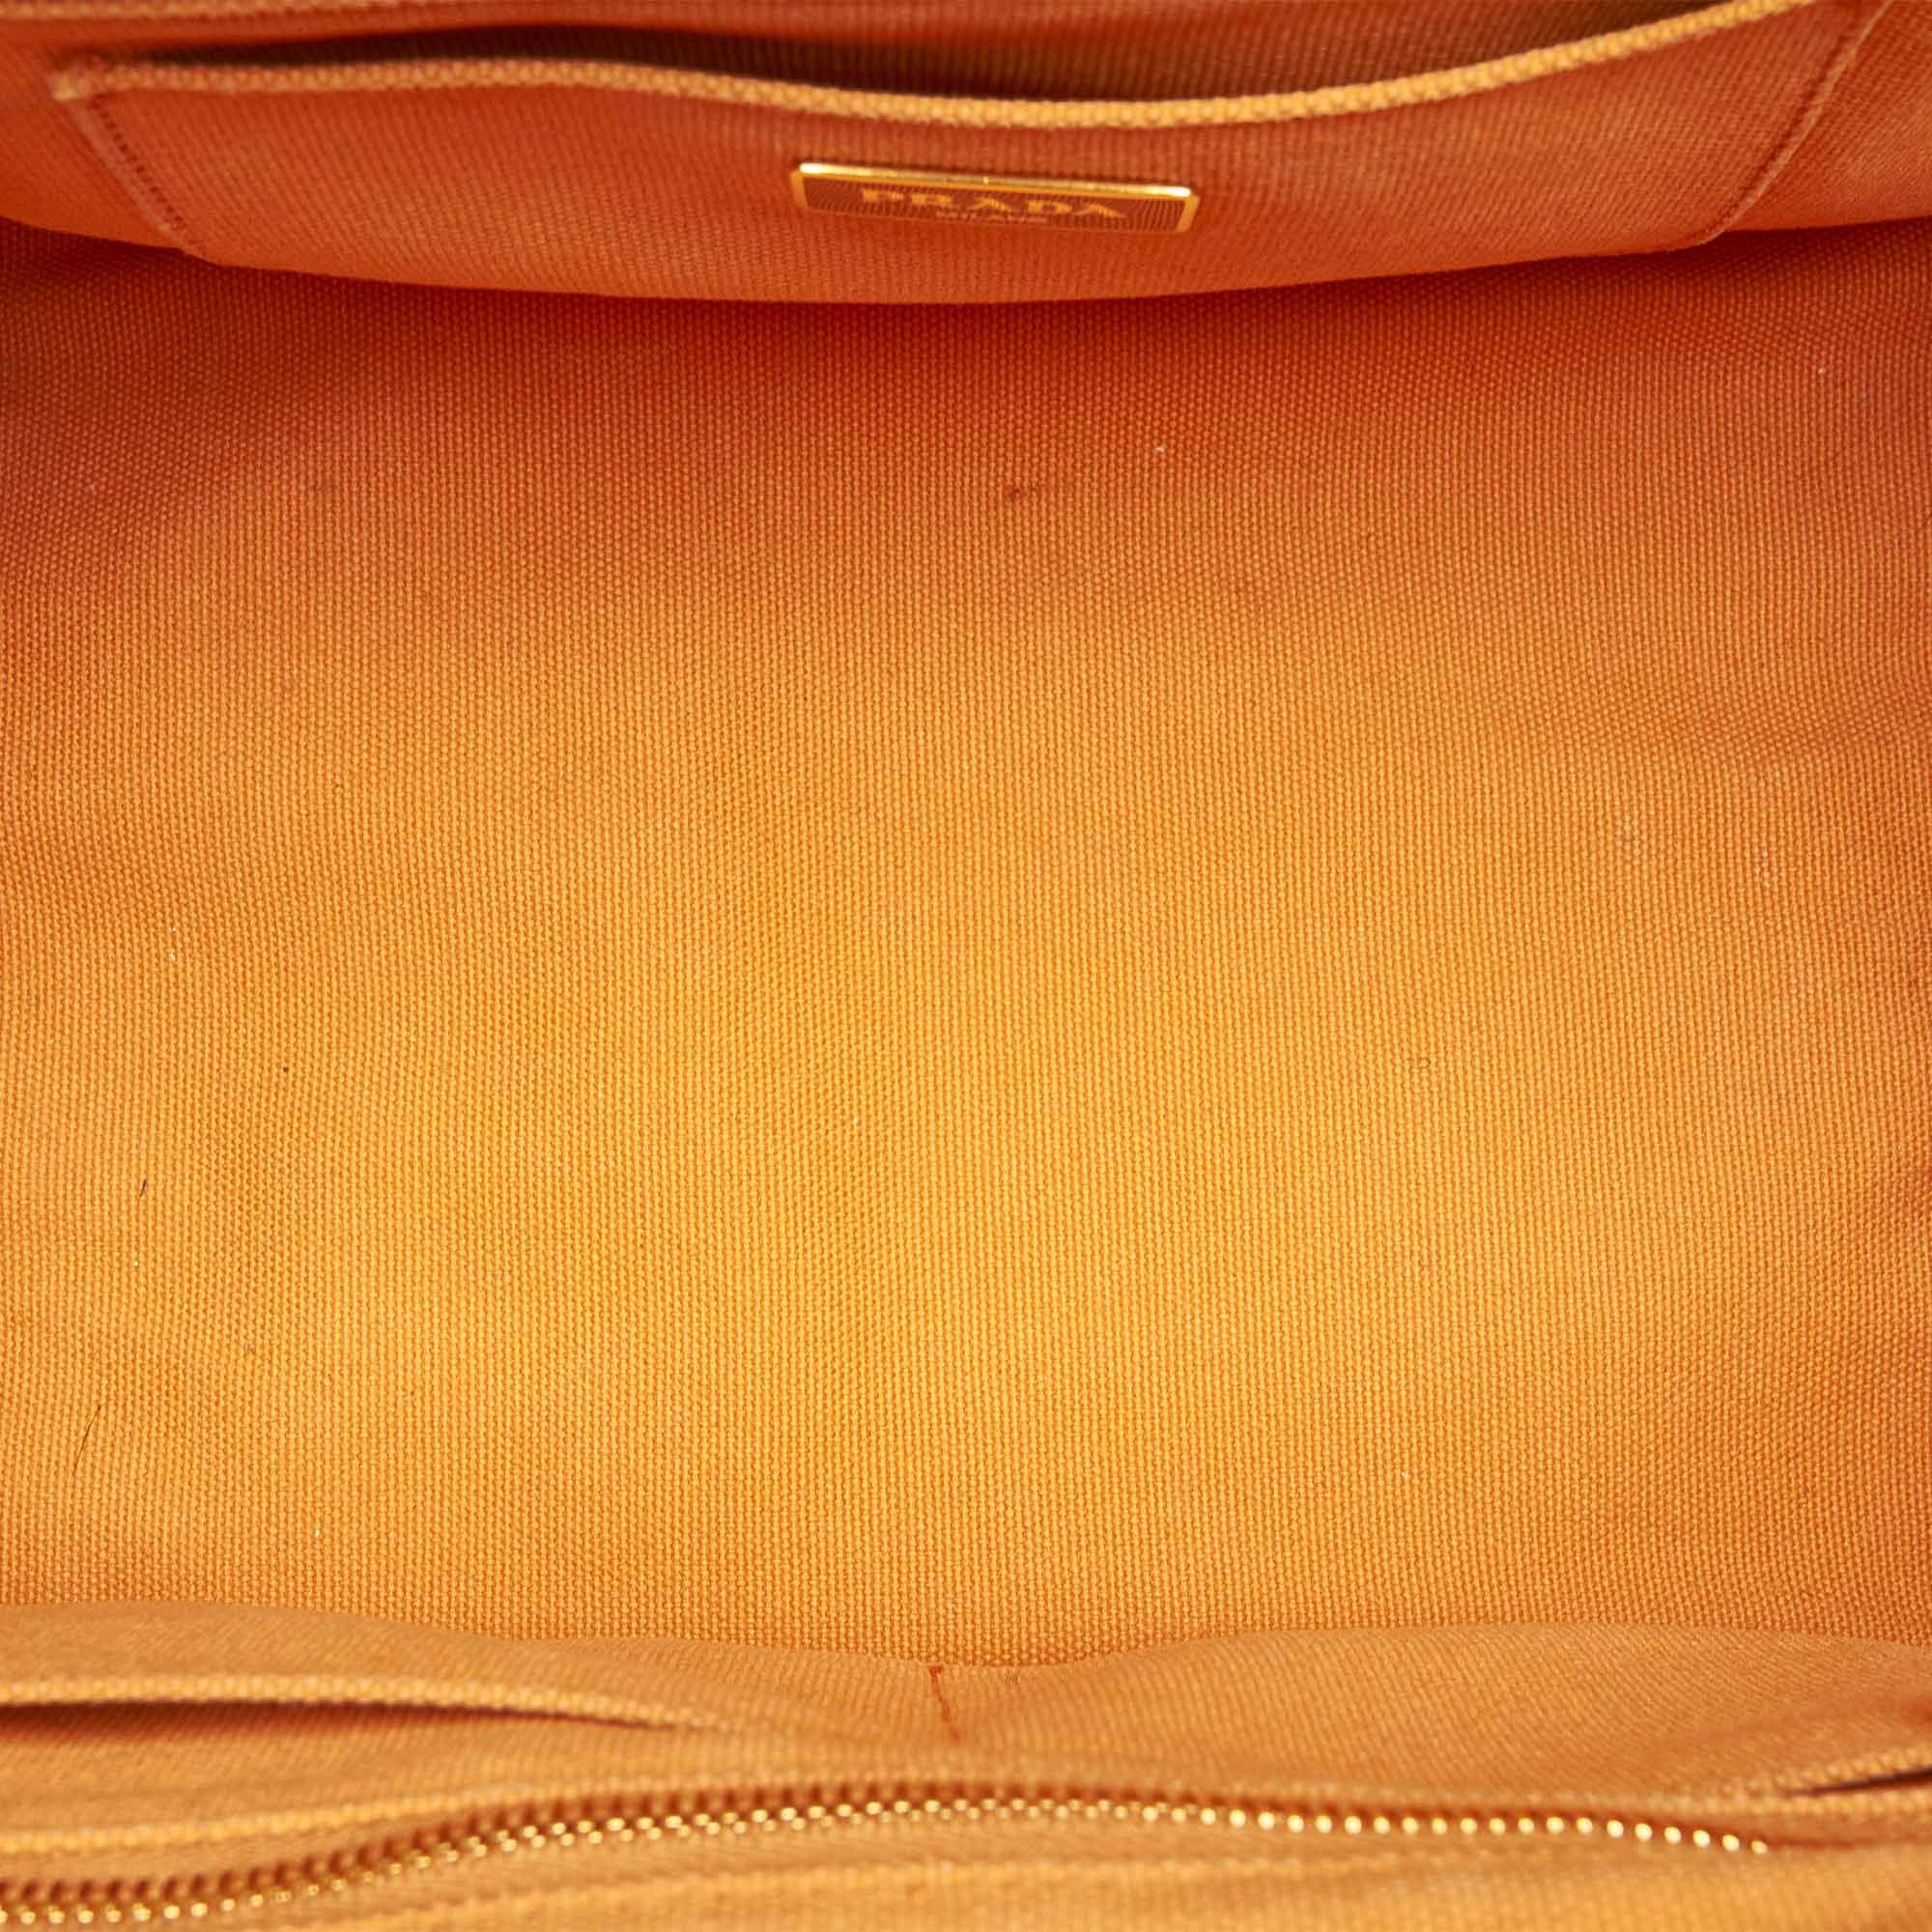 VINTAGE. RRP AS NEW. The Canapa satchel features a studded canvas body, rolled handles, a detachable shoulder strap, an open top, and interior zip and slip pockets.Exterior back is discolored and stained with transfer of color. Exterior bottom is discolored and stained with transfer of color. Exterior corners is discolored. Exterior front is discolored and stained with transfer of color. Exterior handle is discolored and stained with transfer of color. Exterior side is discolored and stained with transfer of color. Studs is scratched and tarnished. Zipper is tarnished. Interior lining is discolored and stained with pen mark and transfer of color. Interior pocket is discolored.

Dimensions:
Length 21cm
Width 33cm
Depth 20.5cm
Hand Drop 10cm
Shoulder Drop 54cm

Original Accessories: Shoulder Strap

Serial Number: none
Color: Orange
Material: Fabric x Canvas
Country of Origin: ITALY
Boutique Reference: SSU165408K1342


Product Rating: GoodCondition

Certificate of Authenticity is available upon request with no extra fee required. Please contact our customer service team.